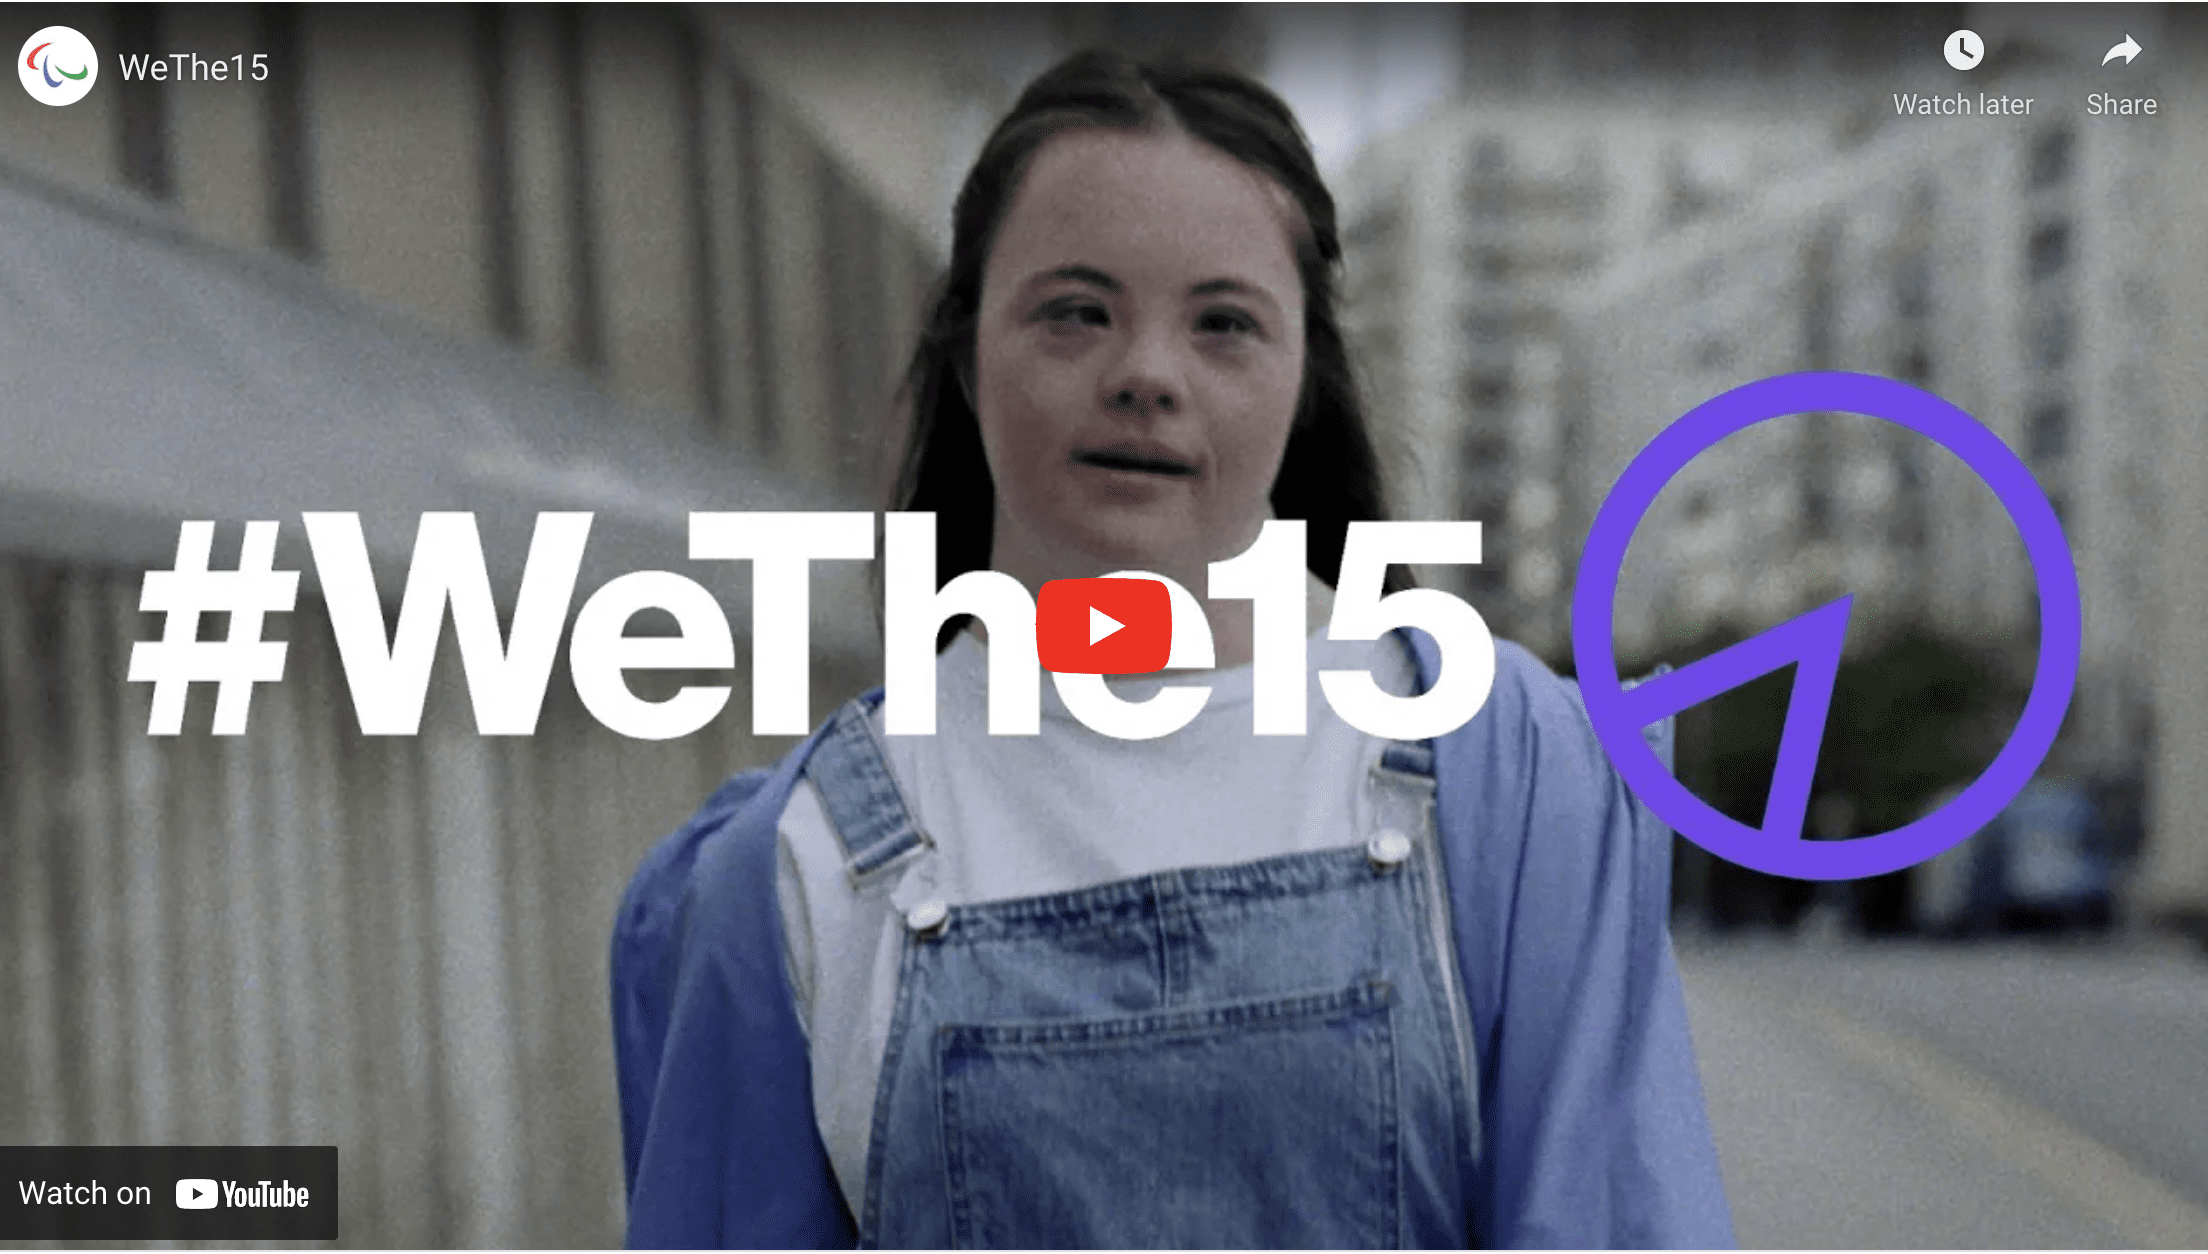 WeThe15 campaigns to break down barriers